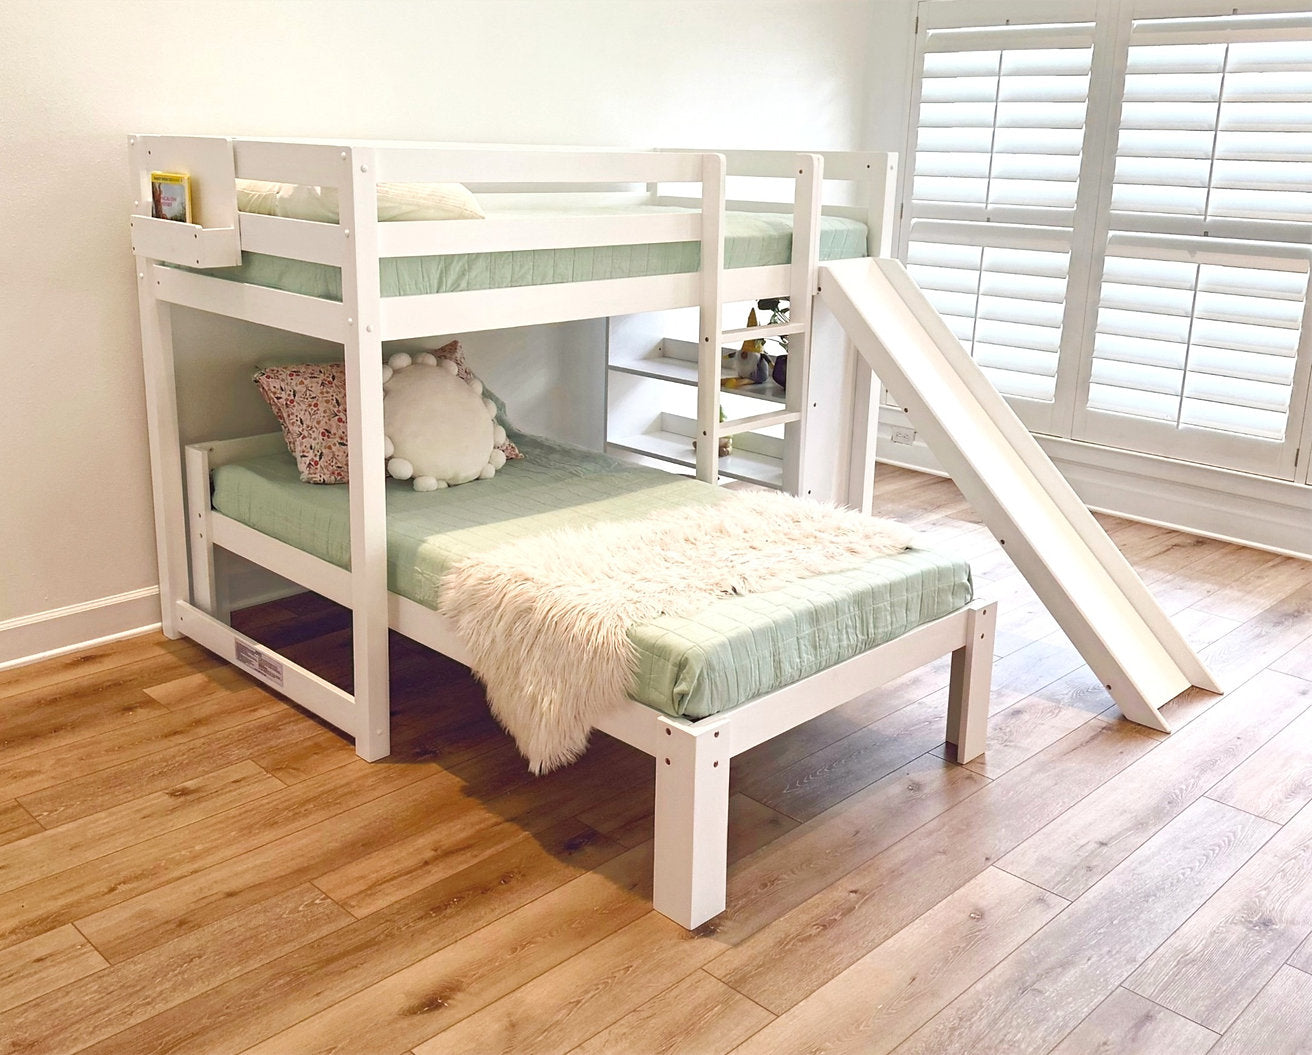 L Shaped Bunk Beds with Storage & Slide (LB-1420 & TB-128-W)